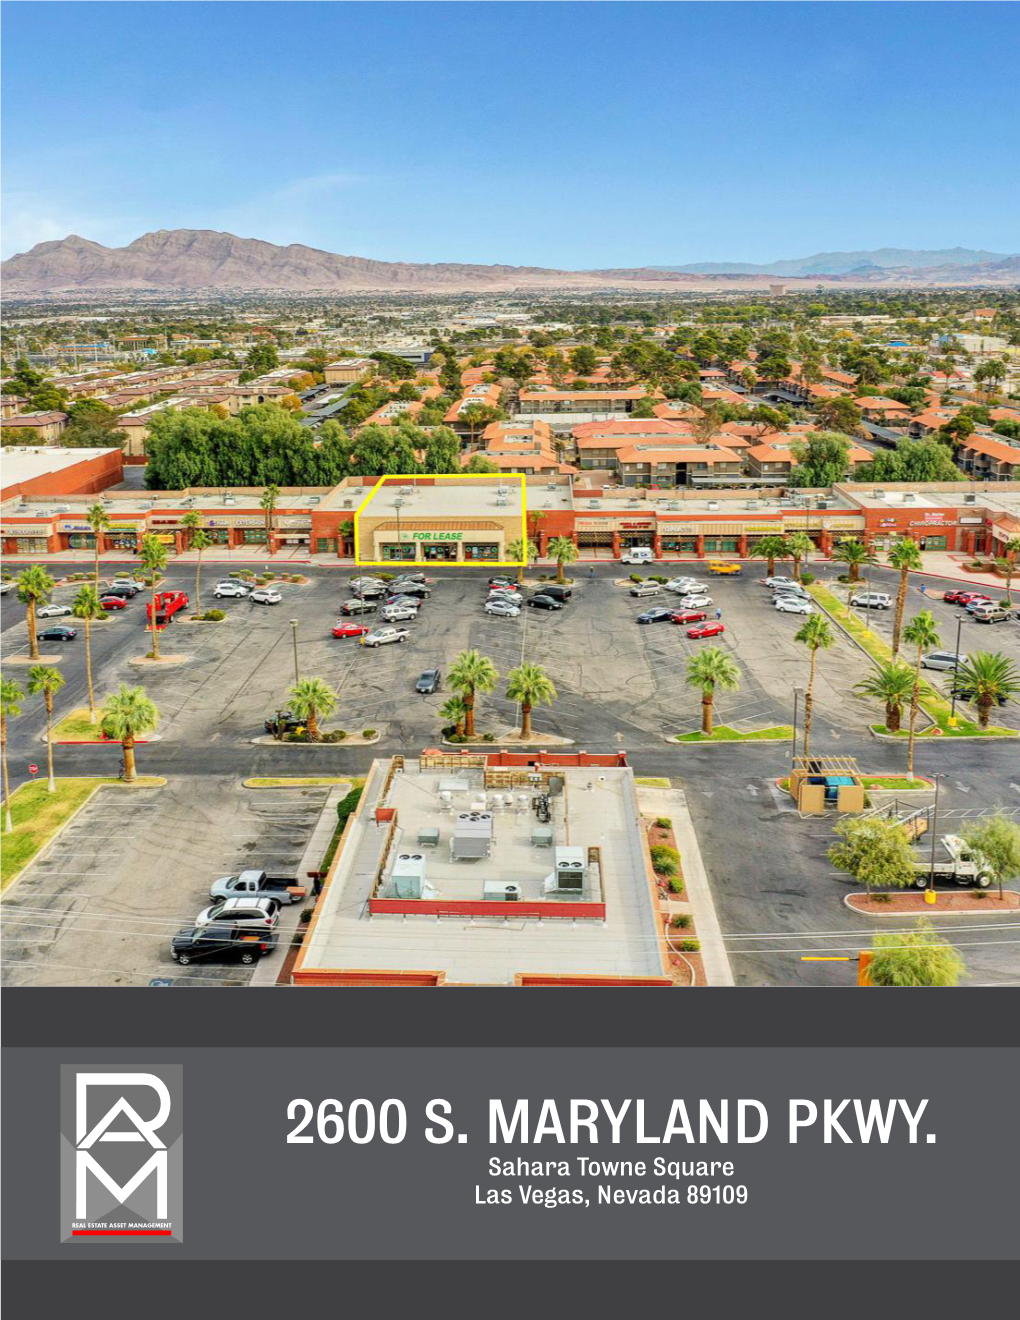 2600 S. Maryland Pkwy. Sahara Towne Square Las Vegas, Nevada 89109 Space Available 12,000 Sq